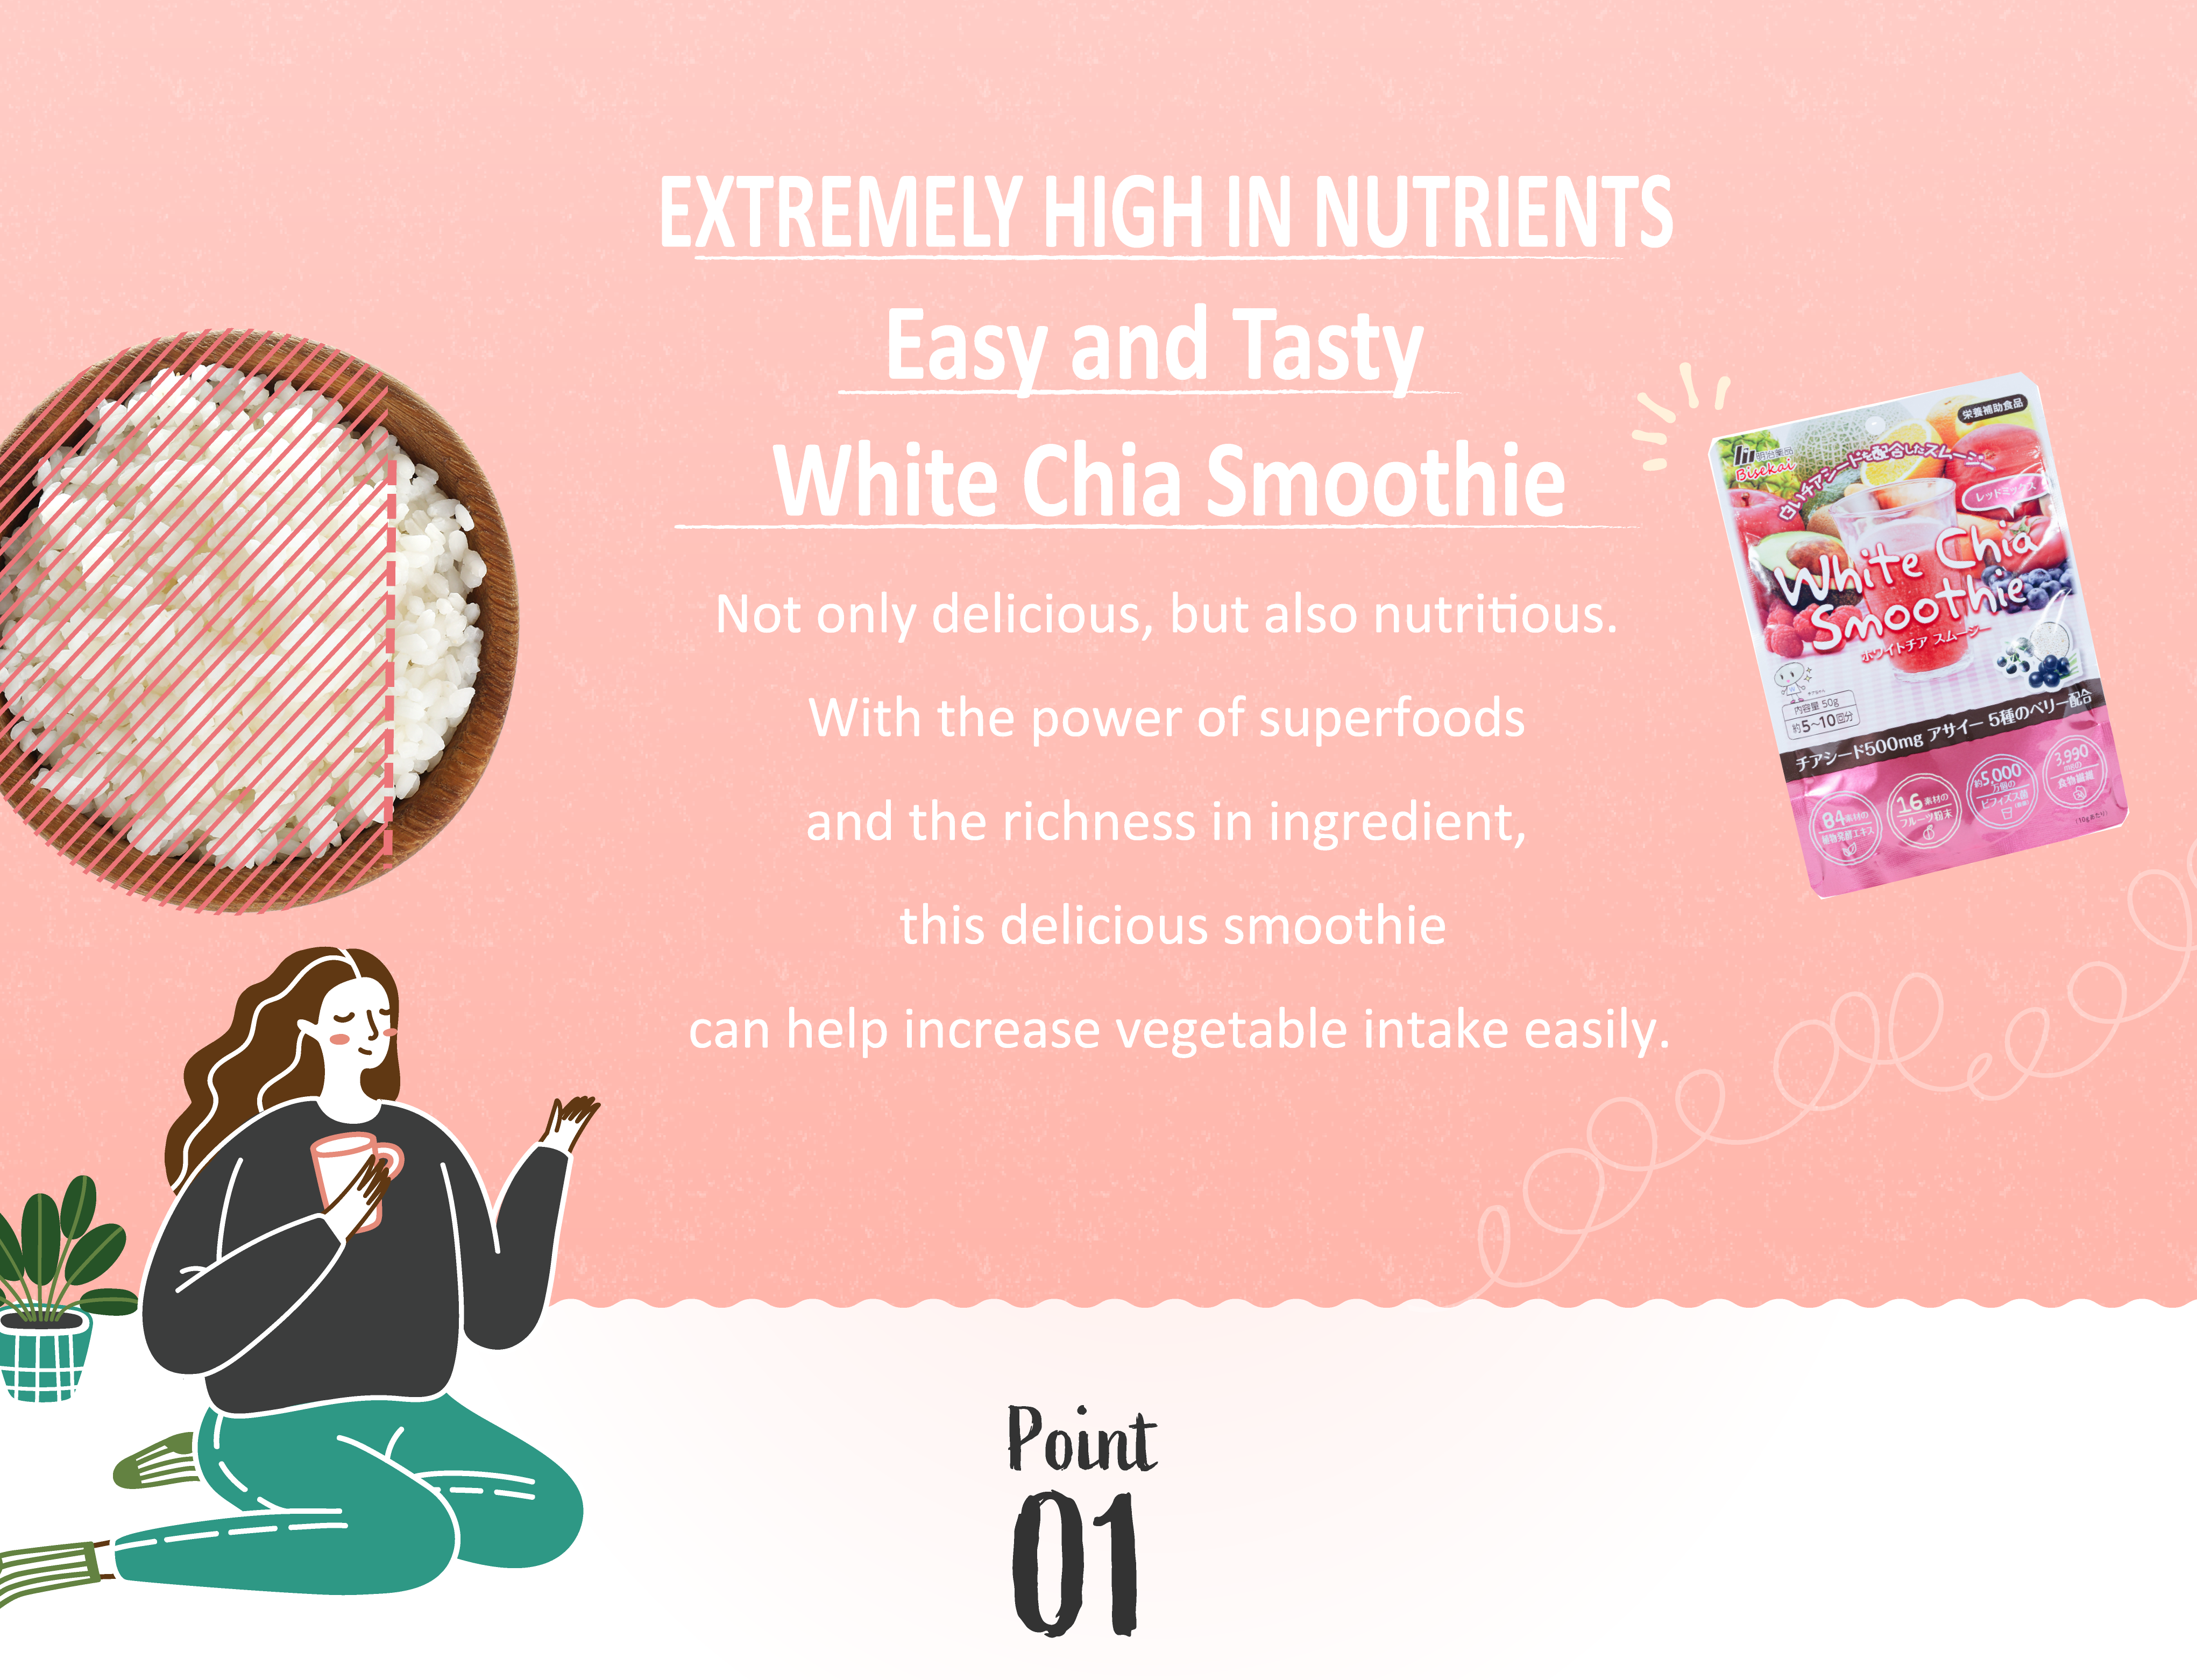 A treasure trove of nutrients White cheerleaders are smoothies and delicious